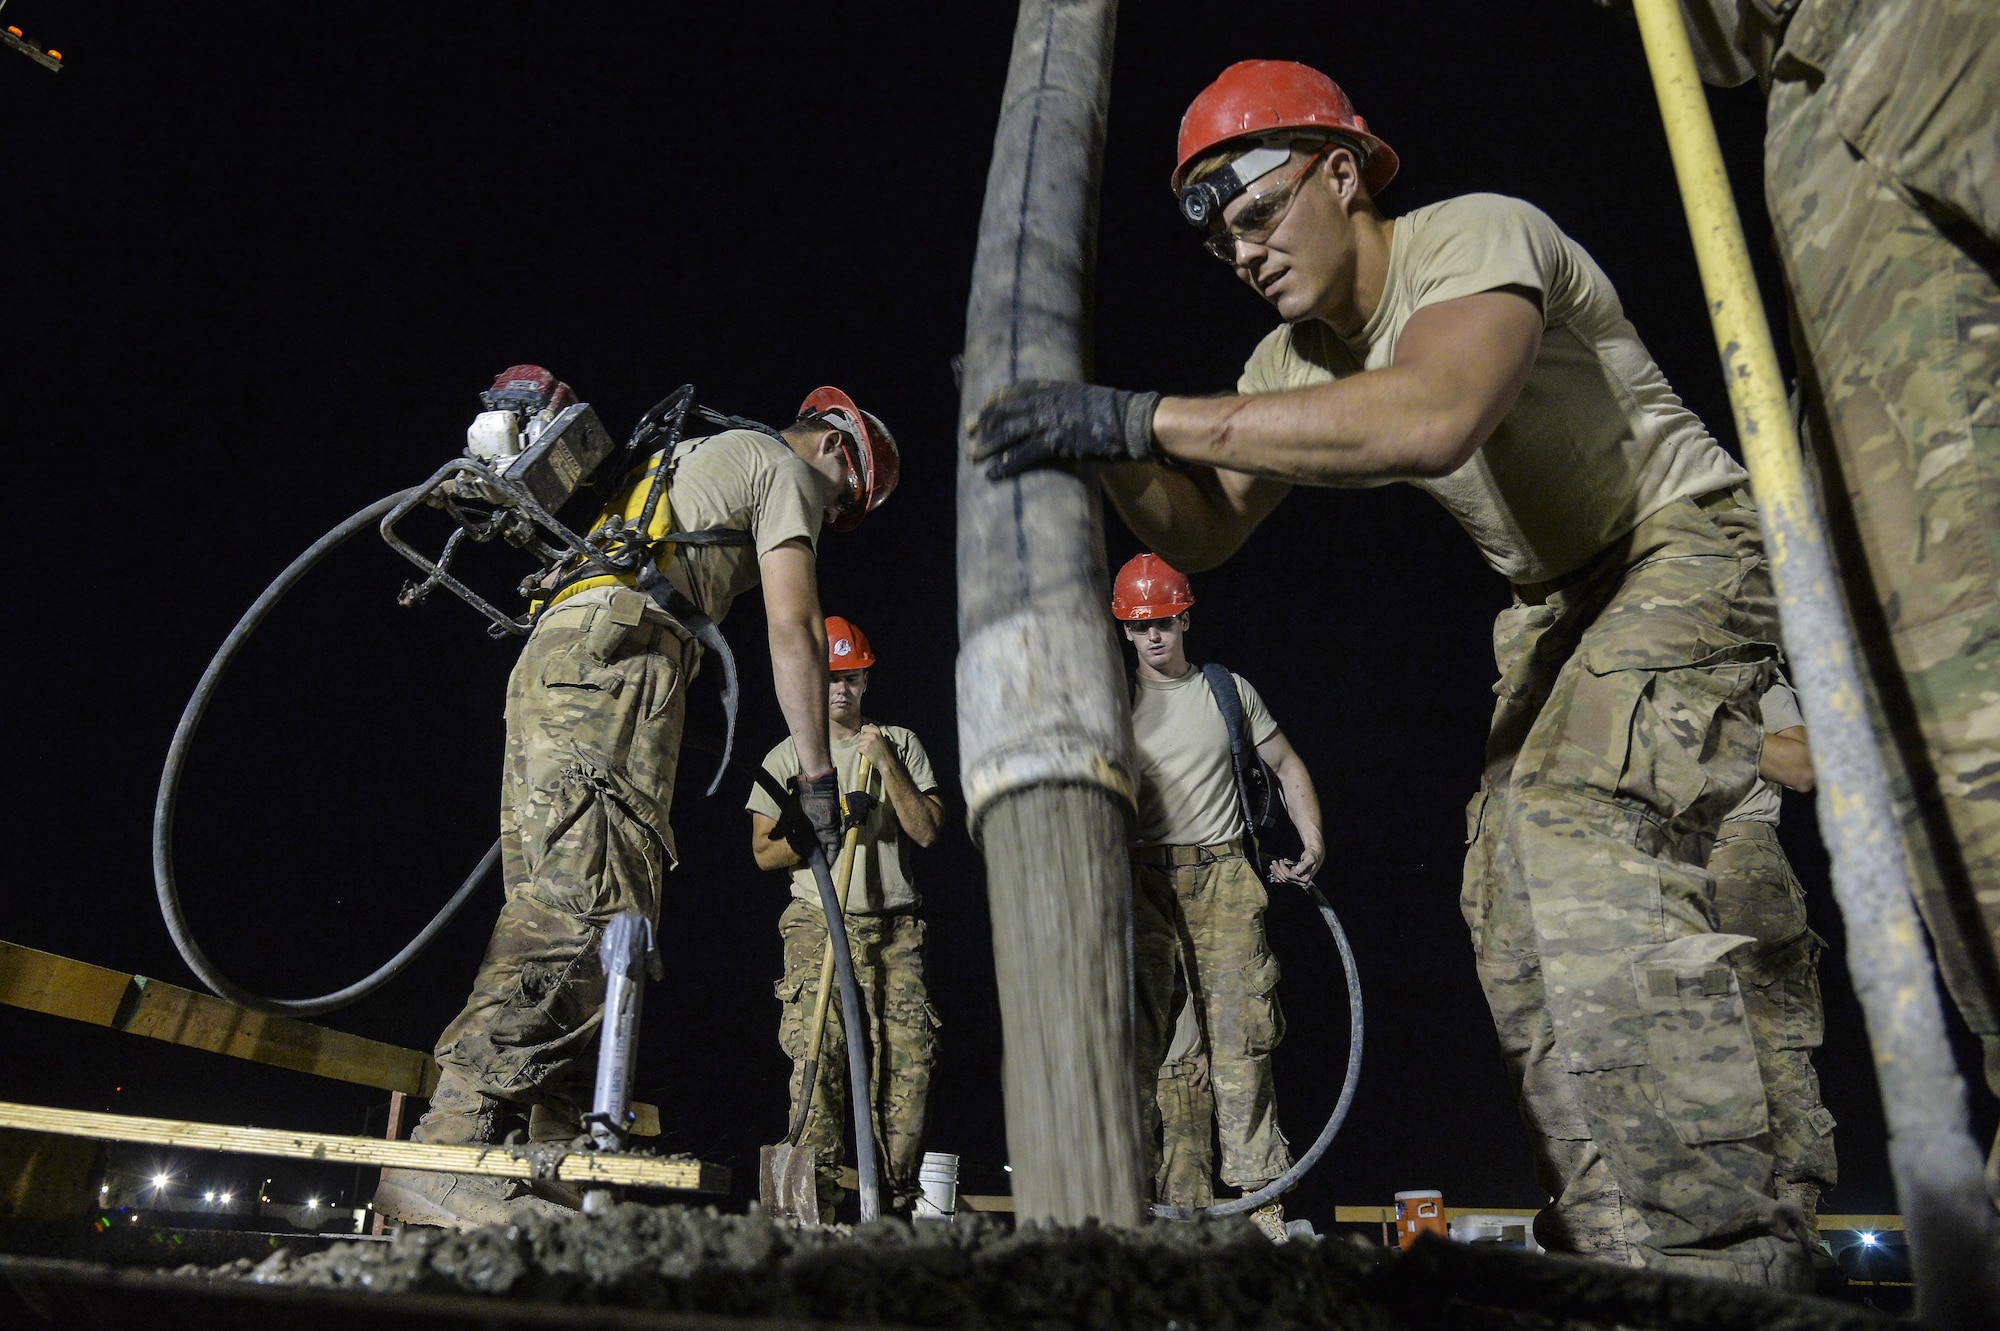 Senior Airman Anthony pours a concrete roof on a structure at an undisclosed location in Southwest Asia July 28, 2015. Airman Anthony is a structural apprentice assigned to the 557th Expeditionary RED HORSE Squadron. (U.S. Air Force photo/Tech. Sgt. Christopher Boitz)